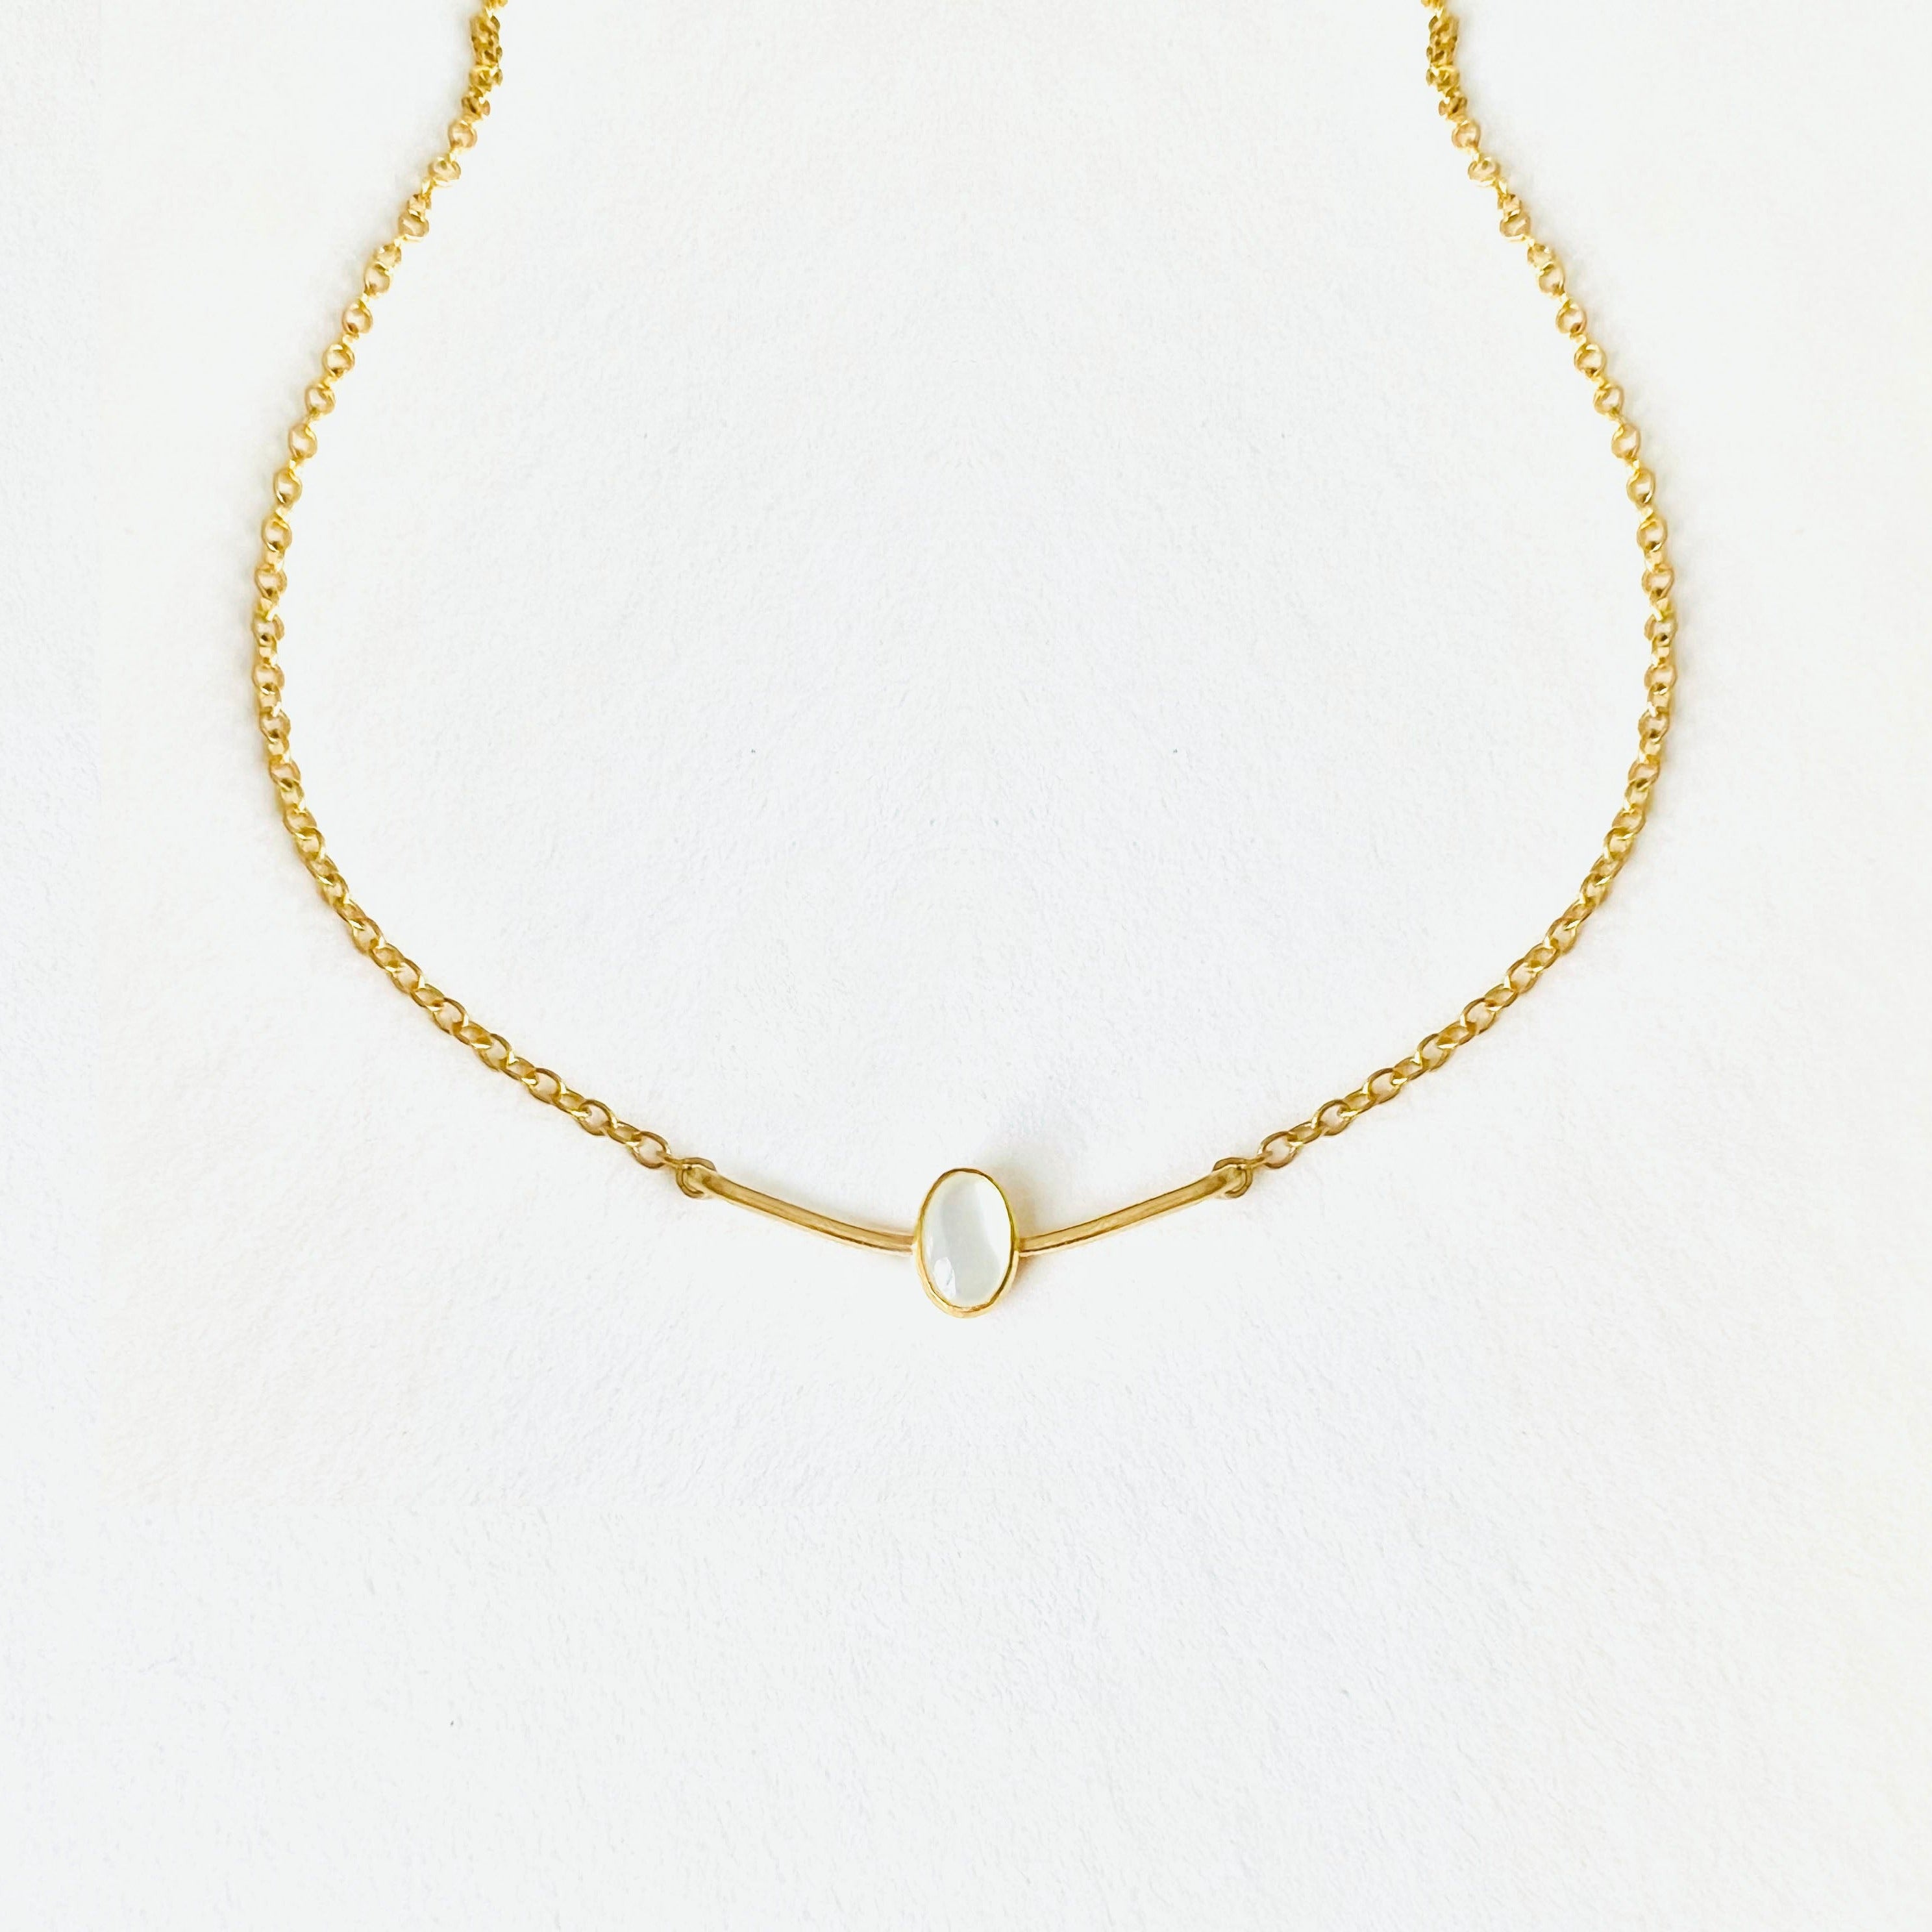 Curved Bar necklace with Oval Pearl center